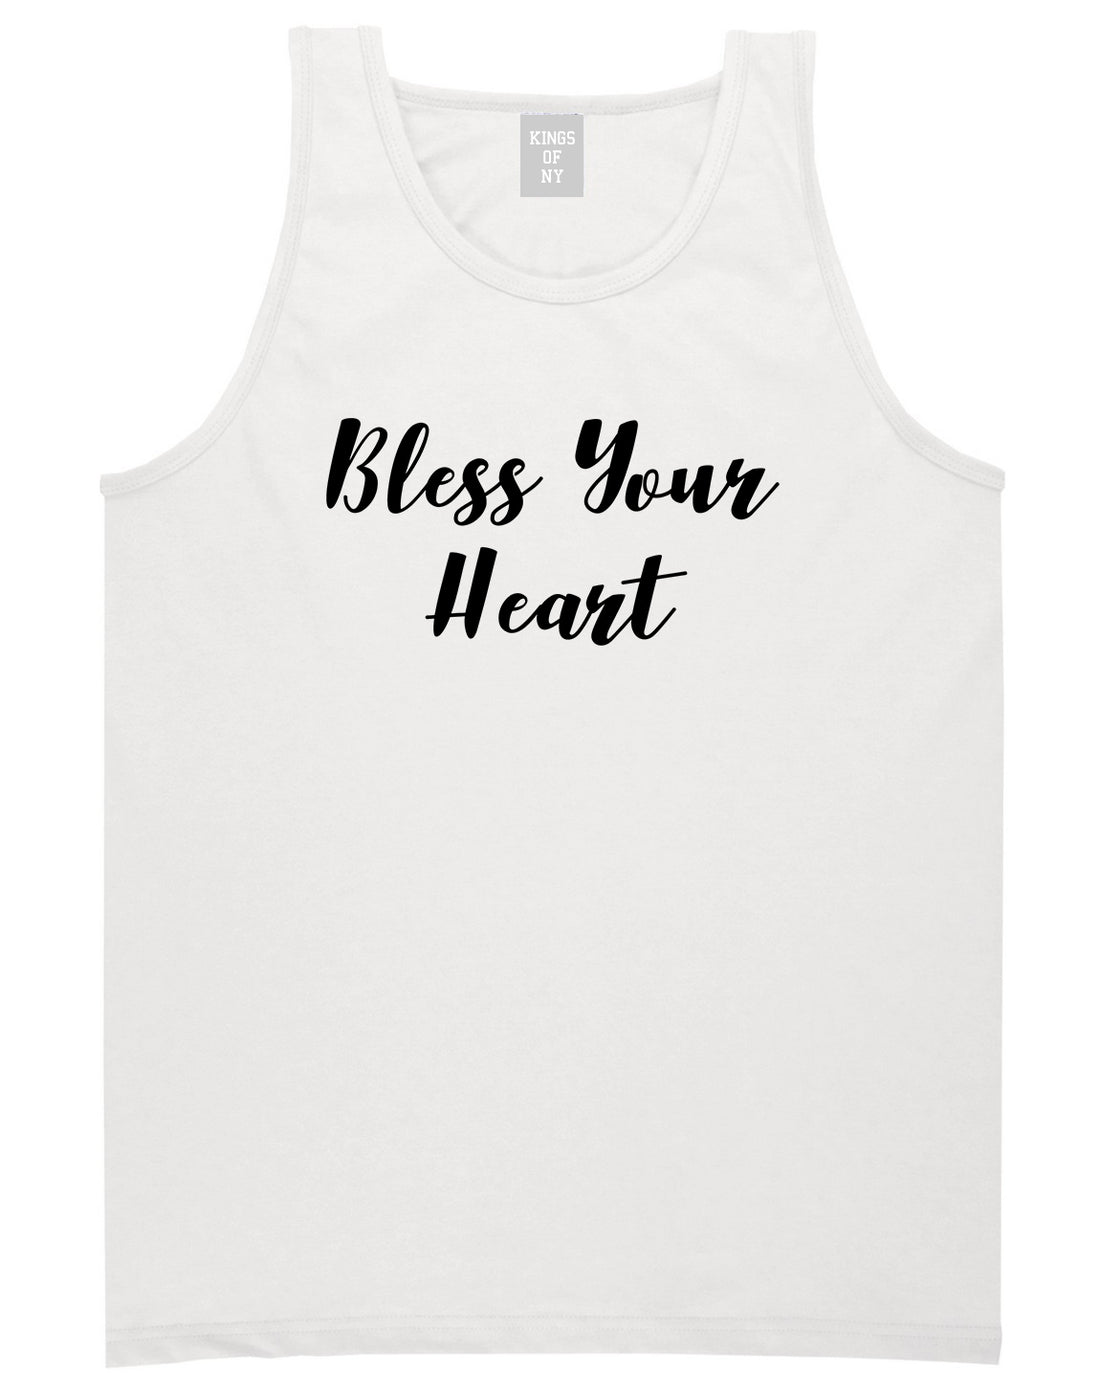 Bless Your Heart White Tank Top Shirt by Kings Of NY